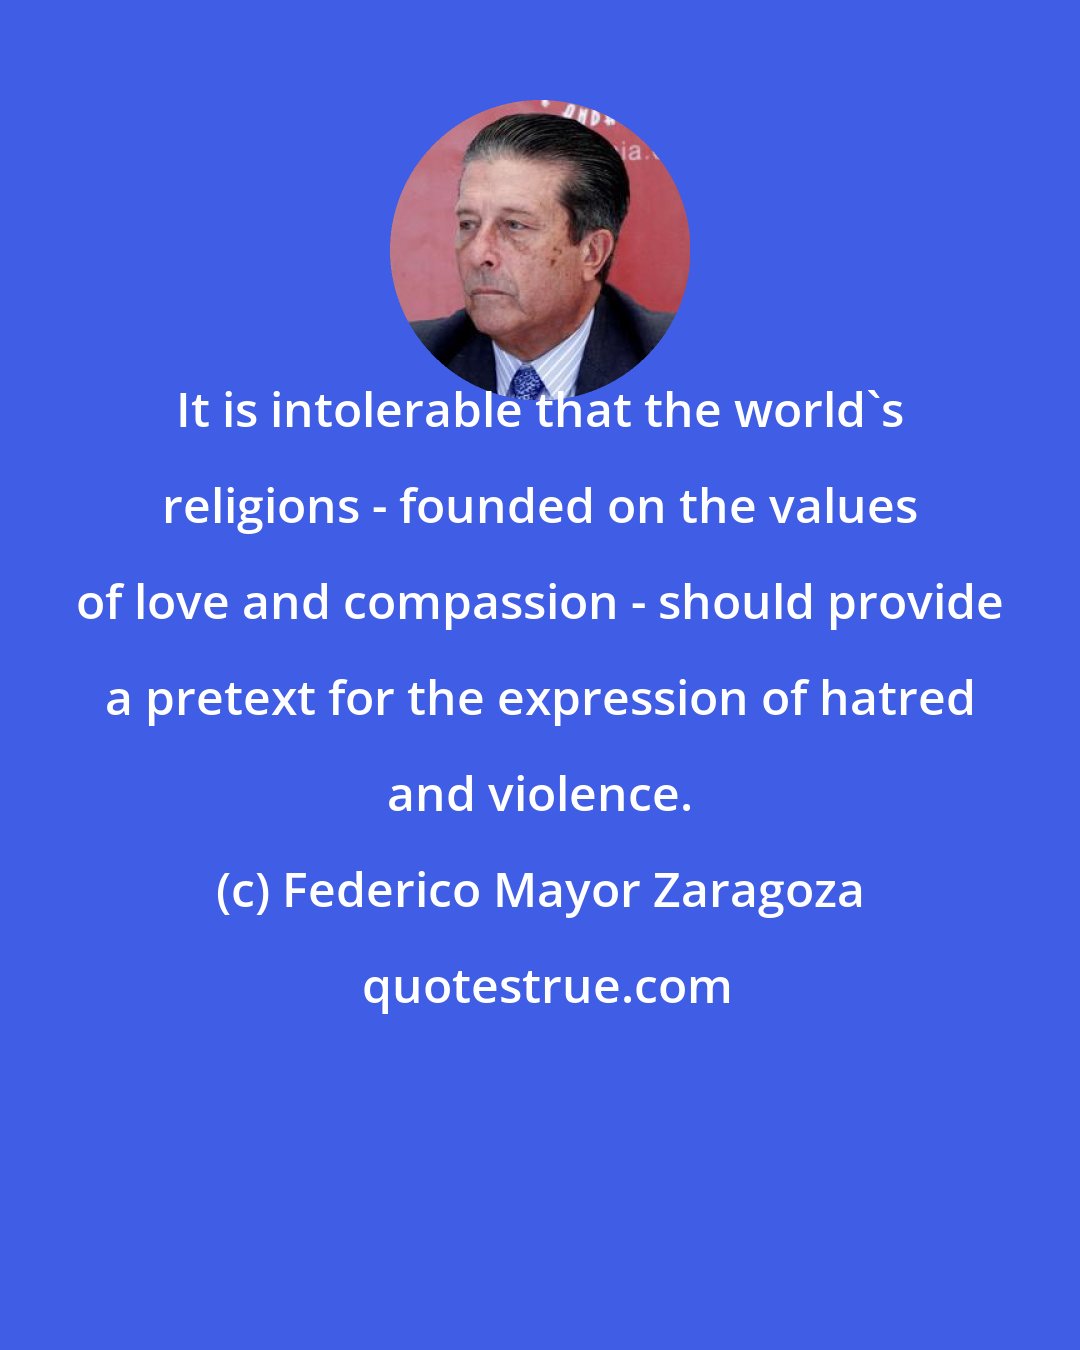 Federico Mayor Zaragoza: It is intolerable that the world's religions - founded on the values of love and compassion - should provide a pretext for the expression of hatred and violence.